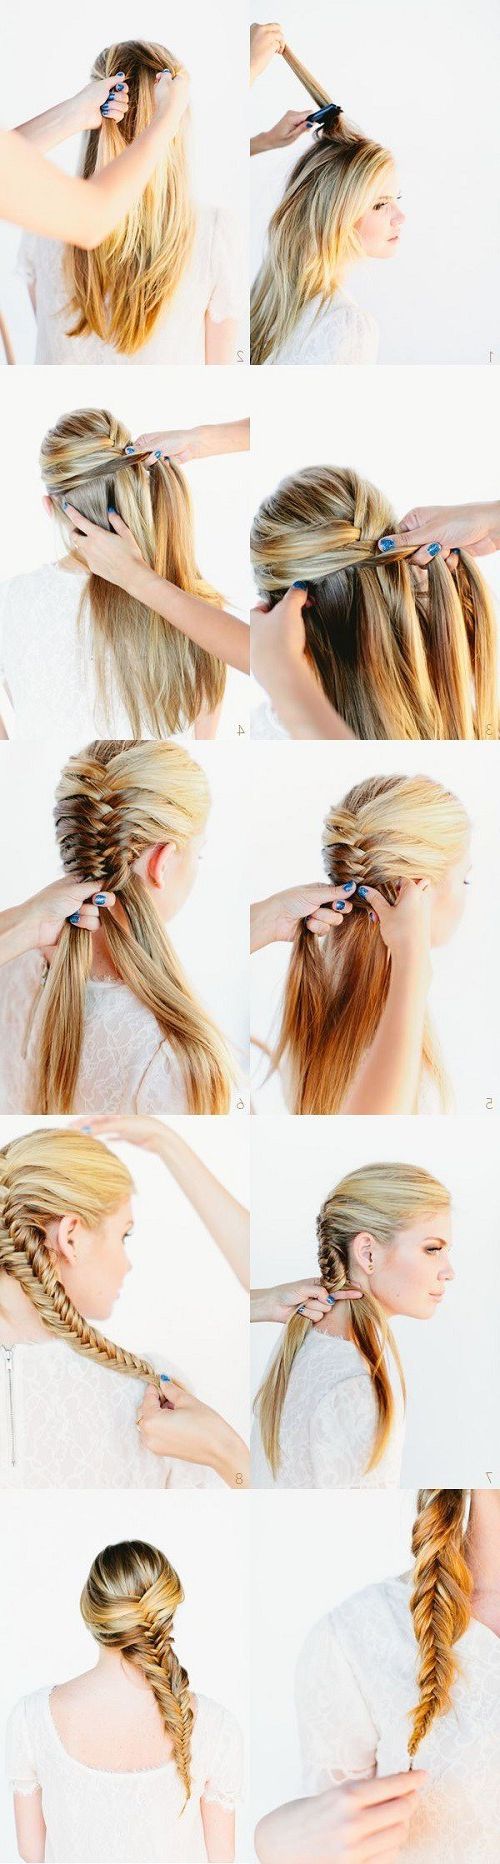 20 Easy Elegant Step By Step Hair Tutorials For Long Inside Most Up To Date Loosely Tied Braid Hairstyles With A Ribbon (View 20 of 20)